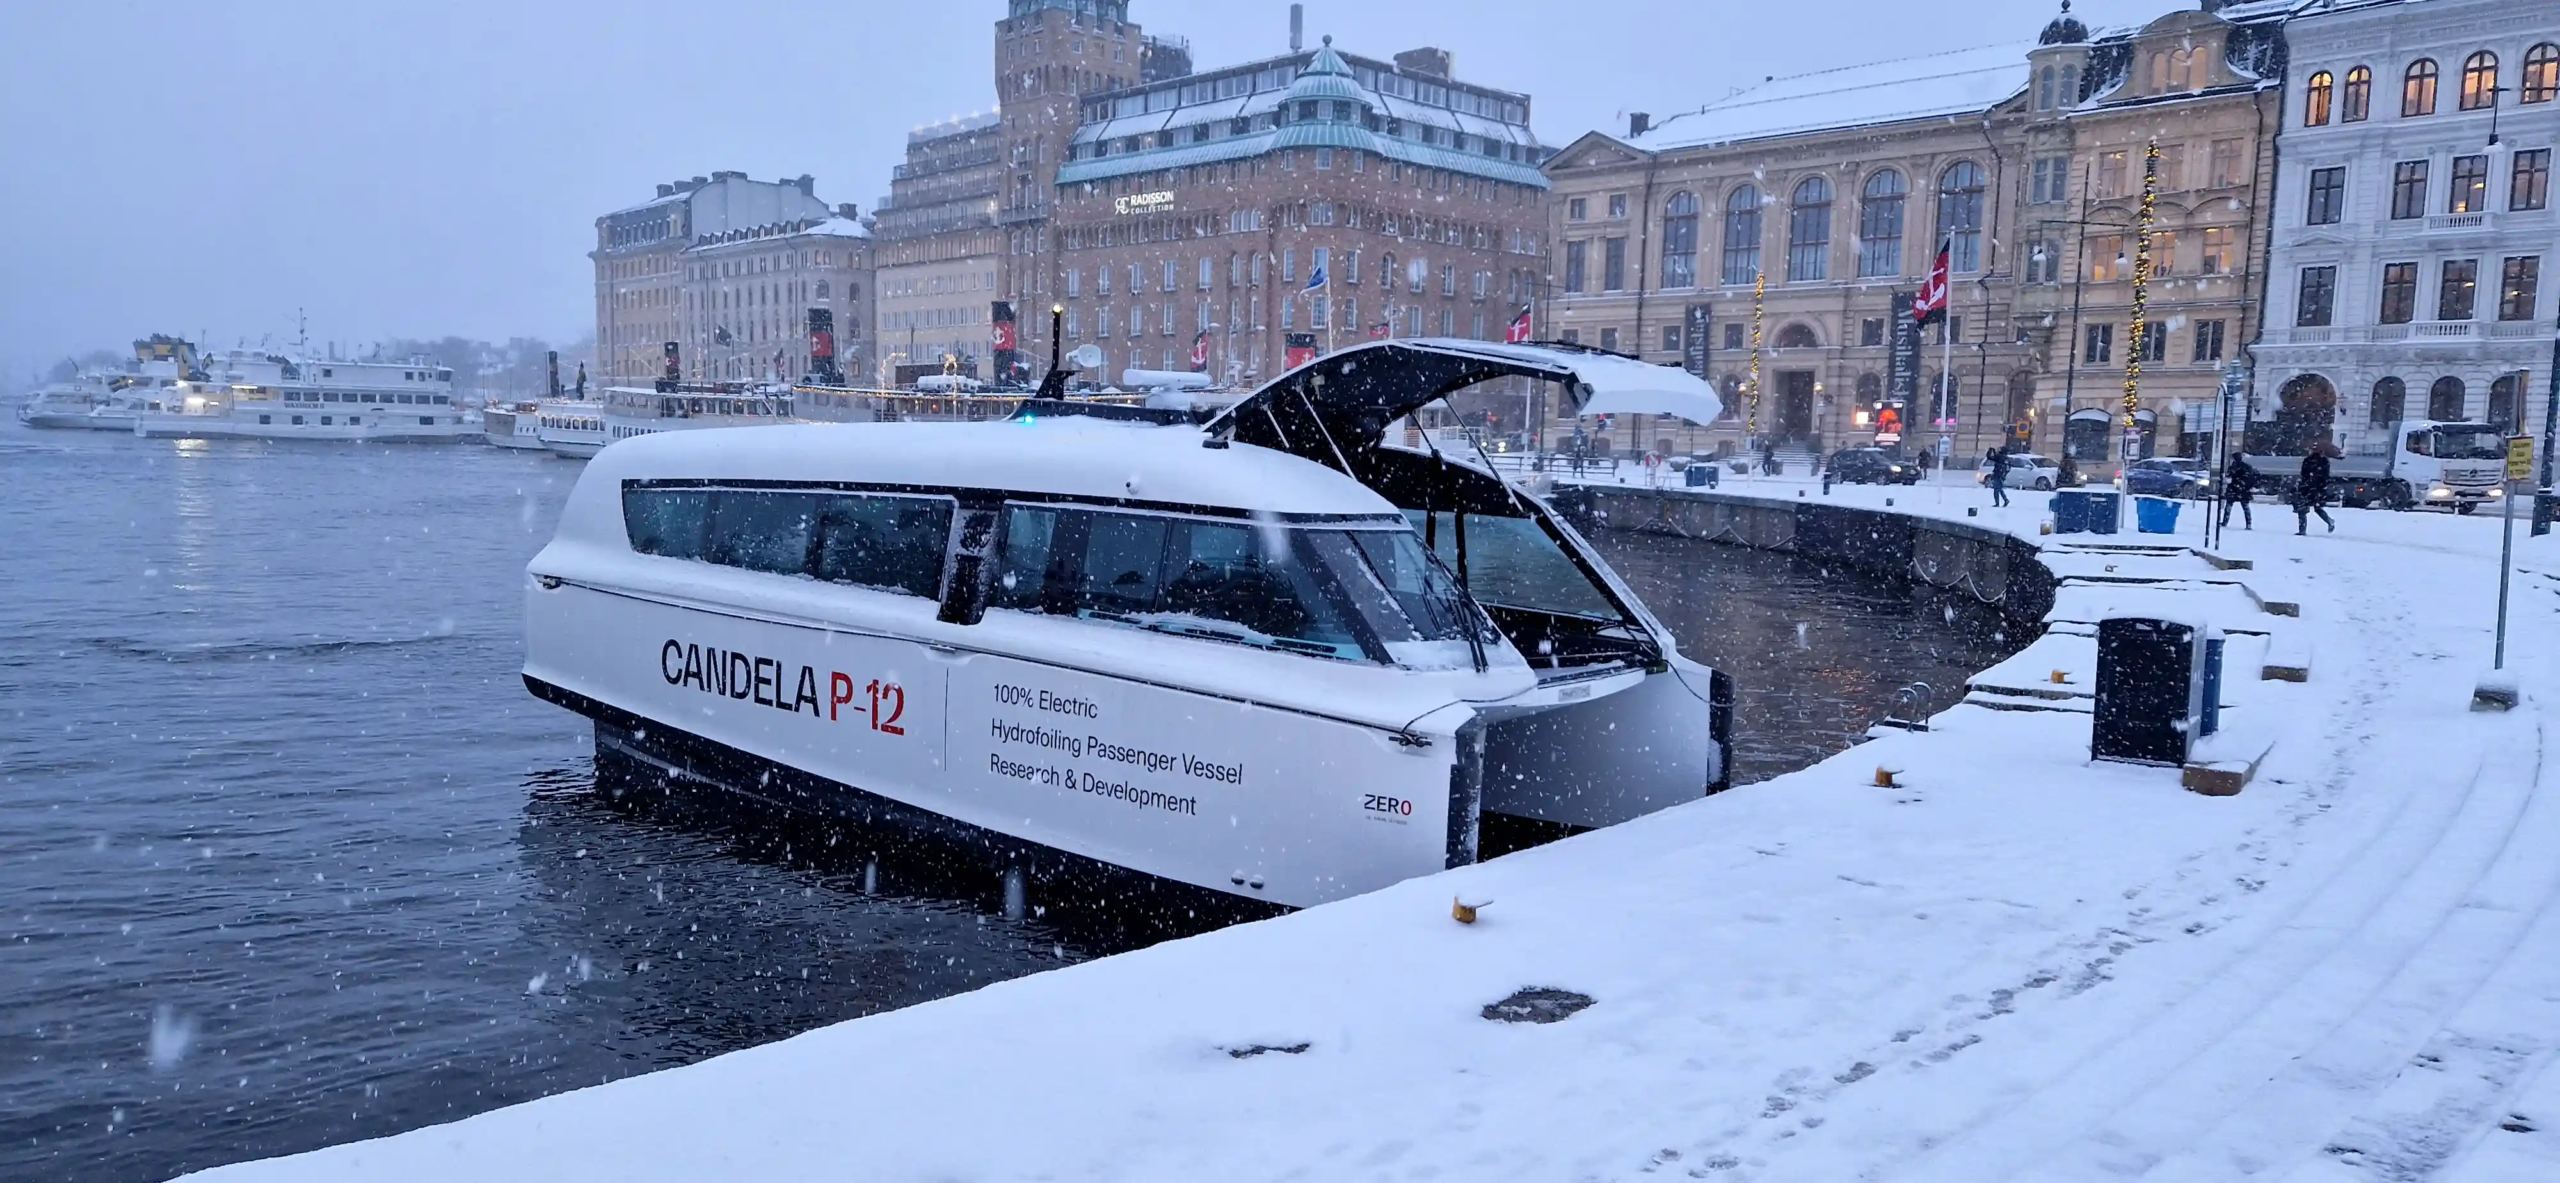 Candela P 12 Electric Ferry in Cold Climate